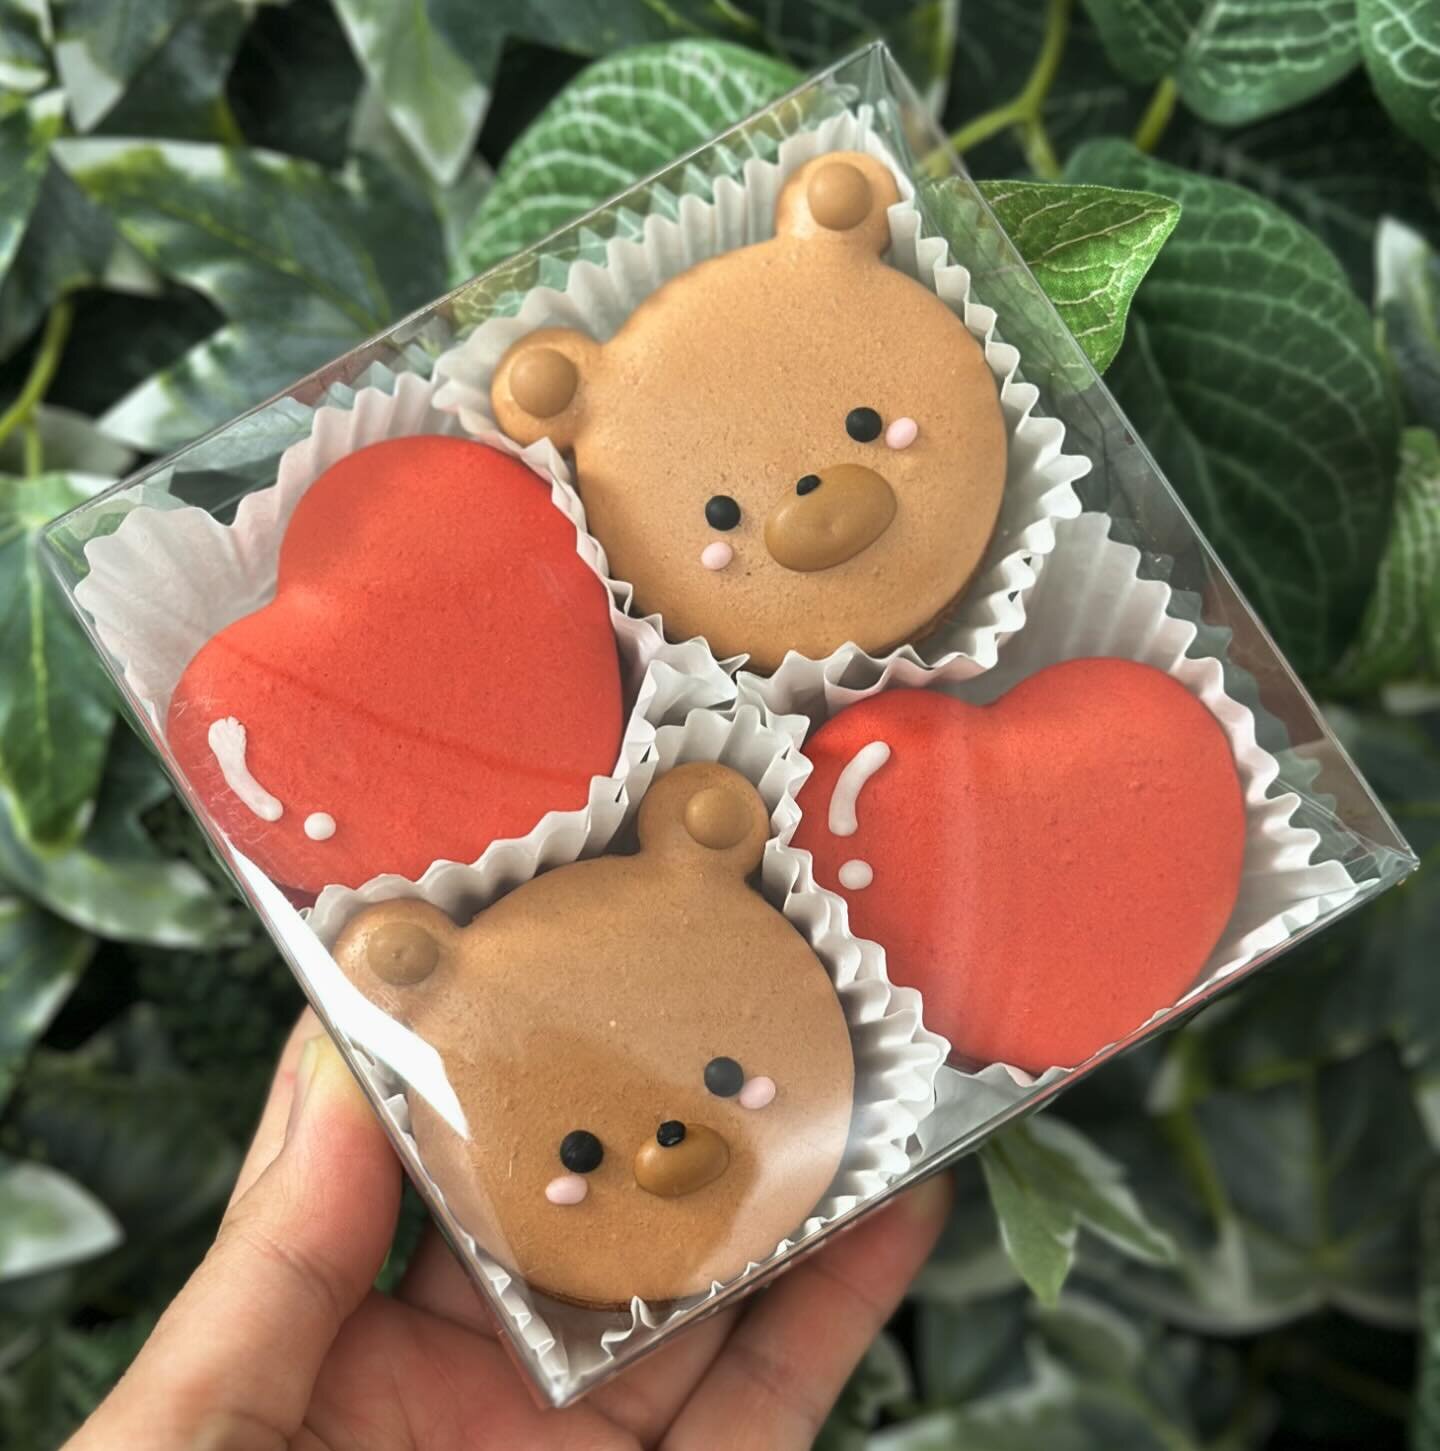 Cutie Valentine&rsquo;s Day 4 packs were a huge hit with you guys! Thank you so much 🥰

Will be planning something similar for Mother&rsquo;s Day so stay tuned for a sweet collaboration 💐

What flavors would you like to see in our Mother&rsquo;s Da